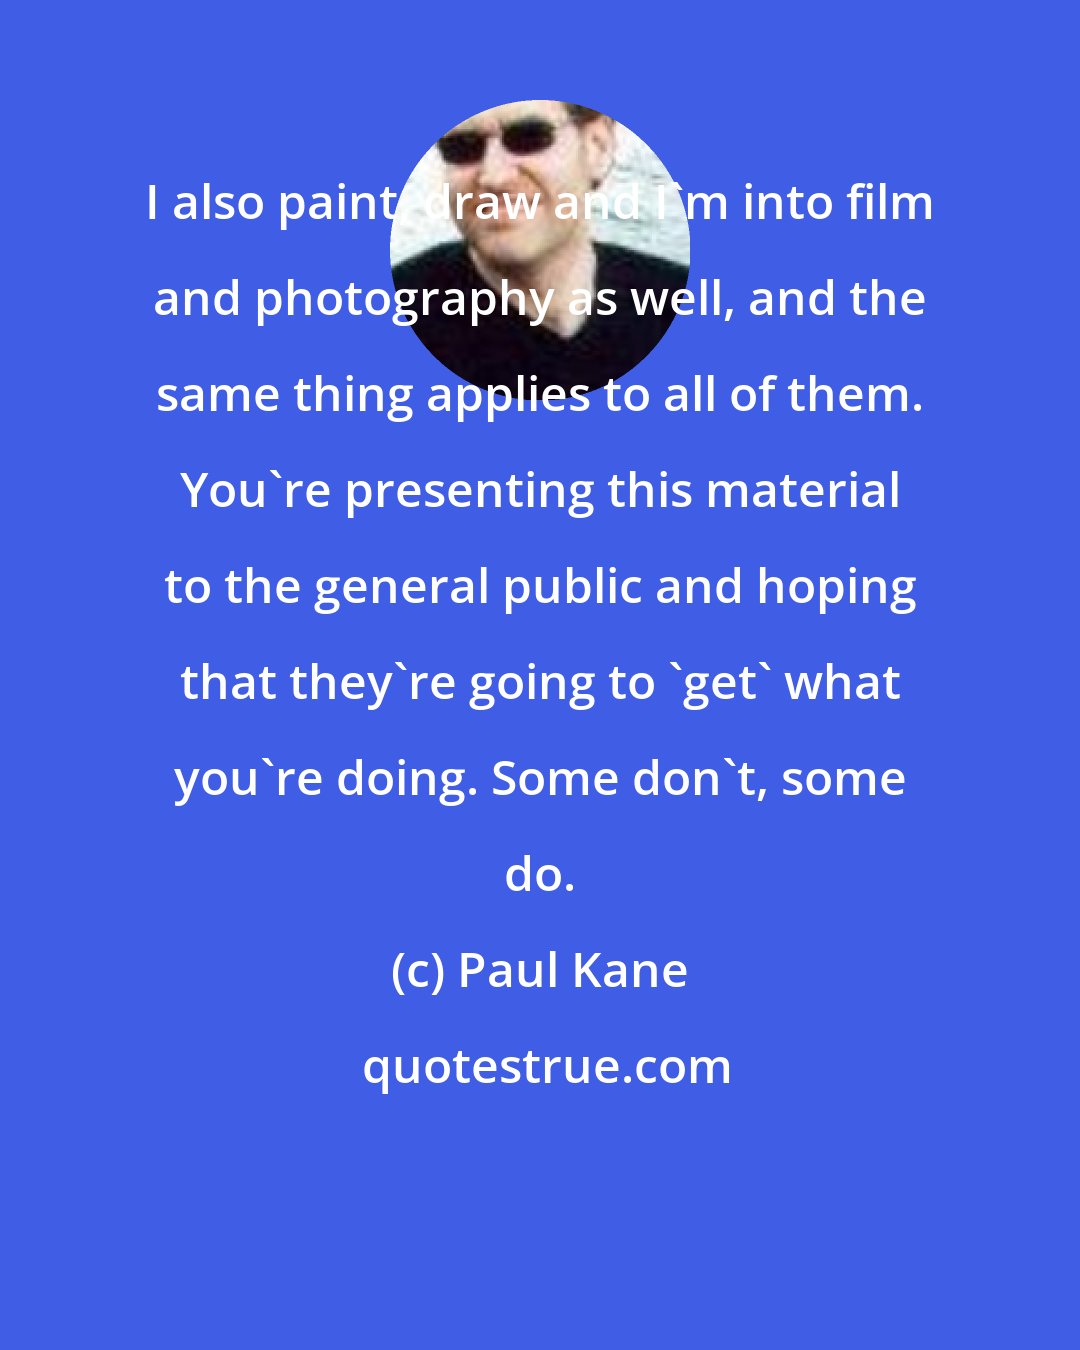 Paul Kane: I also paint, draw and I'm into film and photography as well, and the same thing applies to all of them. You're presenting this material to the general public and hoping that they're going to 'get' what you're doing. Some don't, some do.